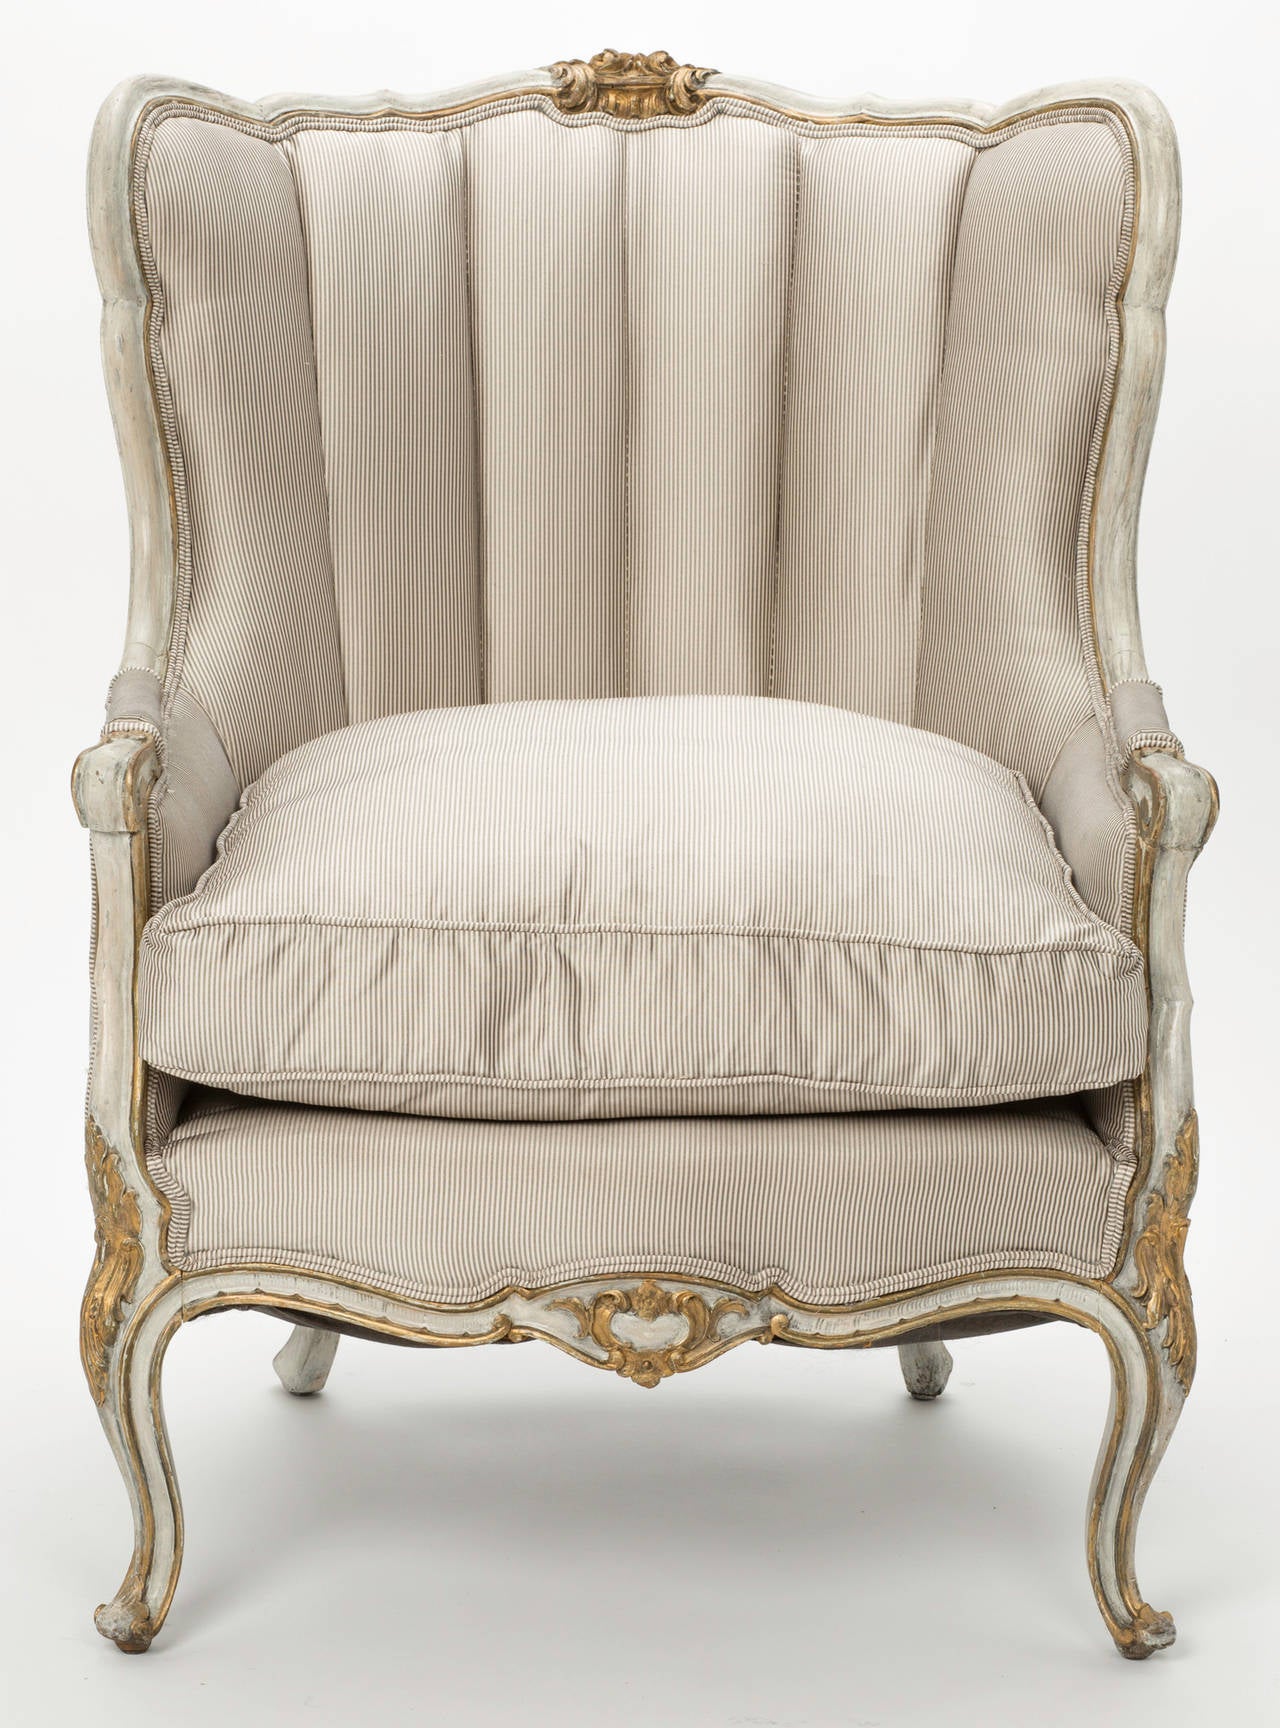 Lovely and comfortable French wingback armchair. Carved painted hard wood frame with gilt accents. Newly upholstered in pewter and cream silk taffeta pin stripe, circa, 1880s. Soft channel back and down seat cushion. Amply sized for comfort.